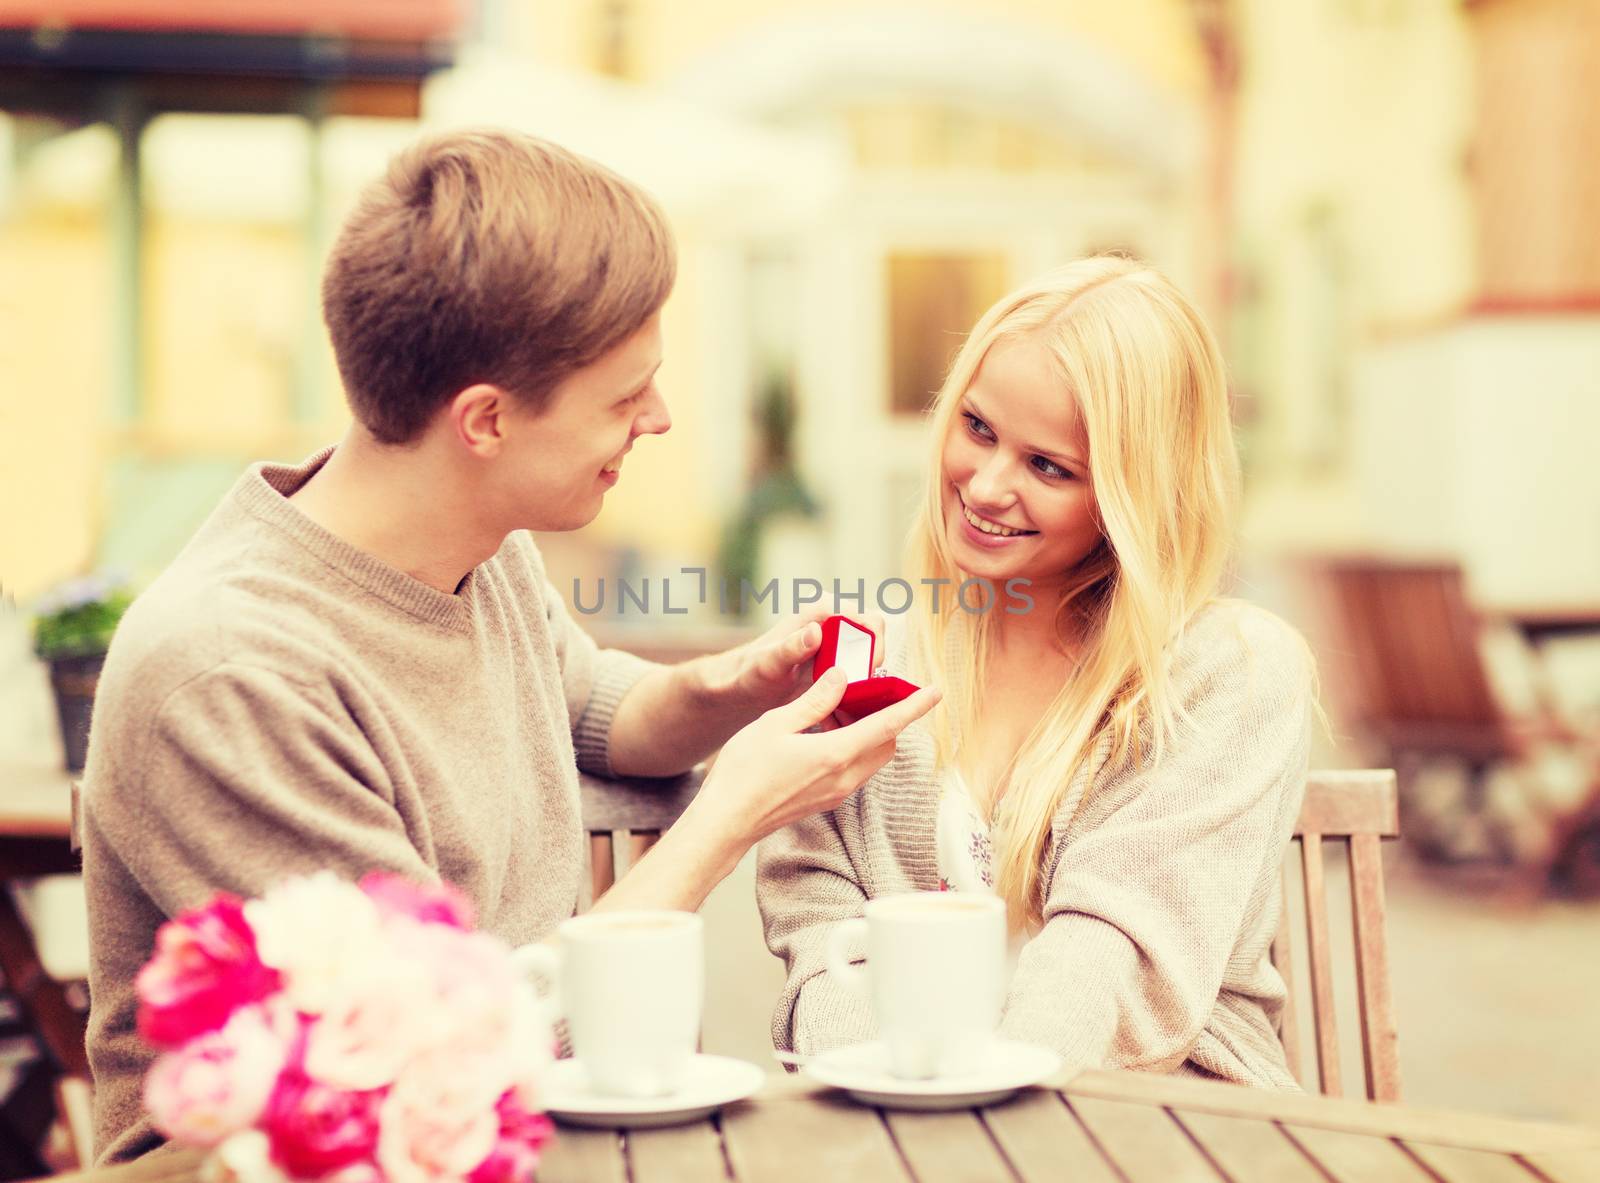 summer holidays, love, relationship and dating concept - romantic man proposing to beautiful woman